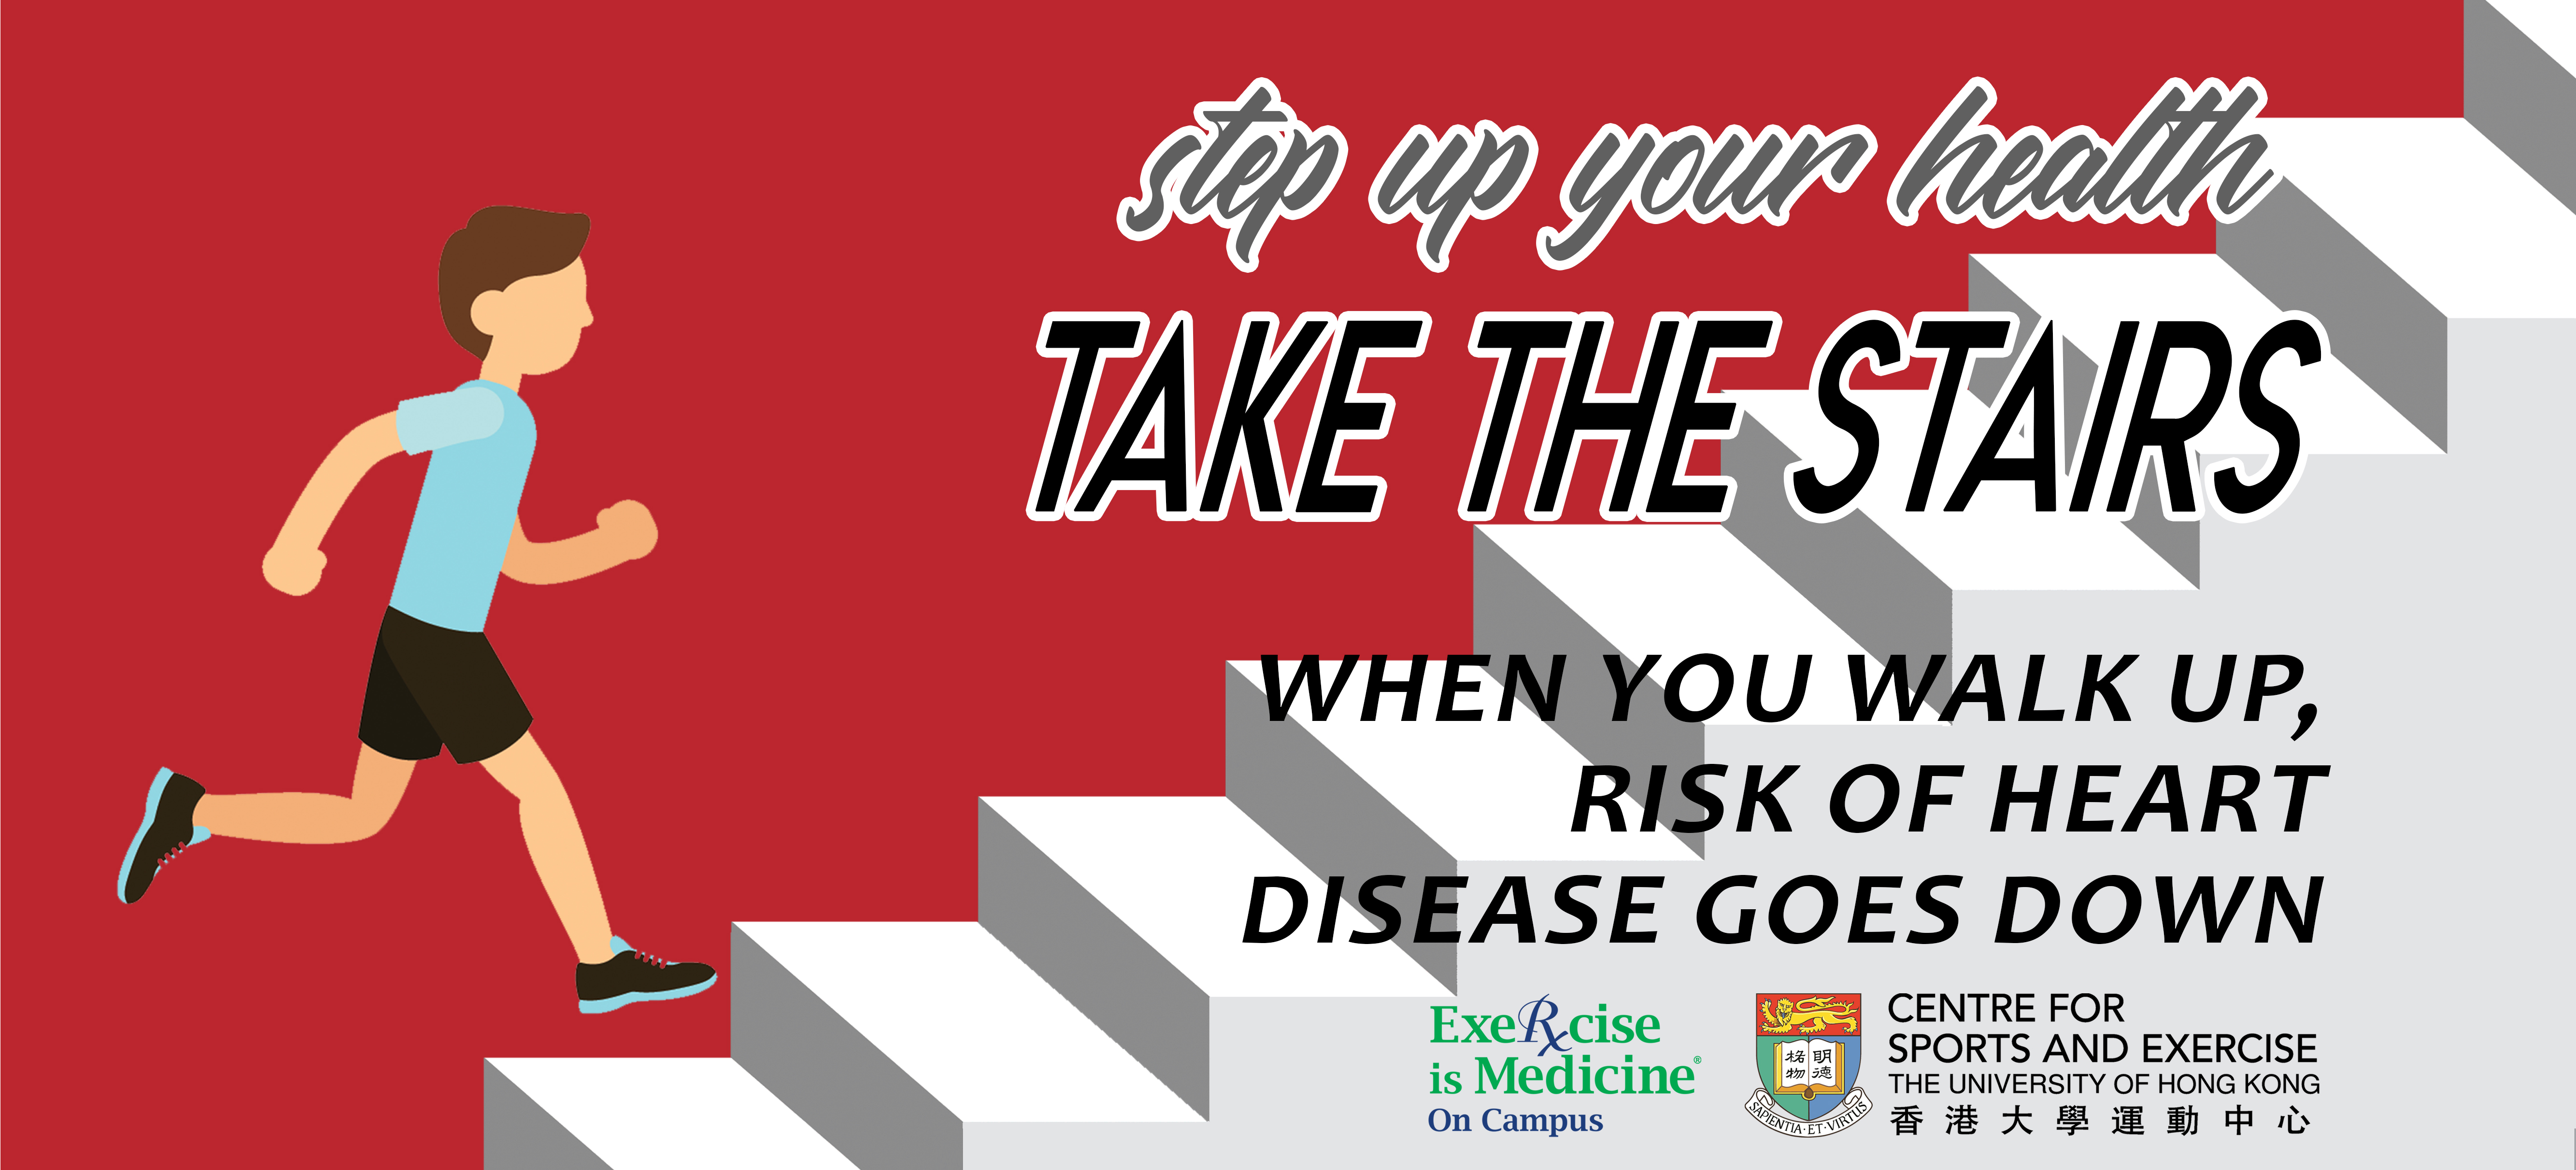 Step up your Health - Take the Stairs